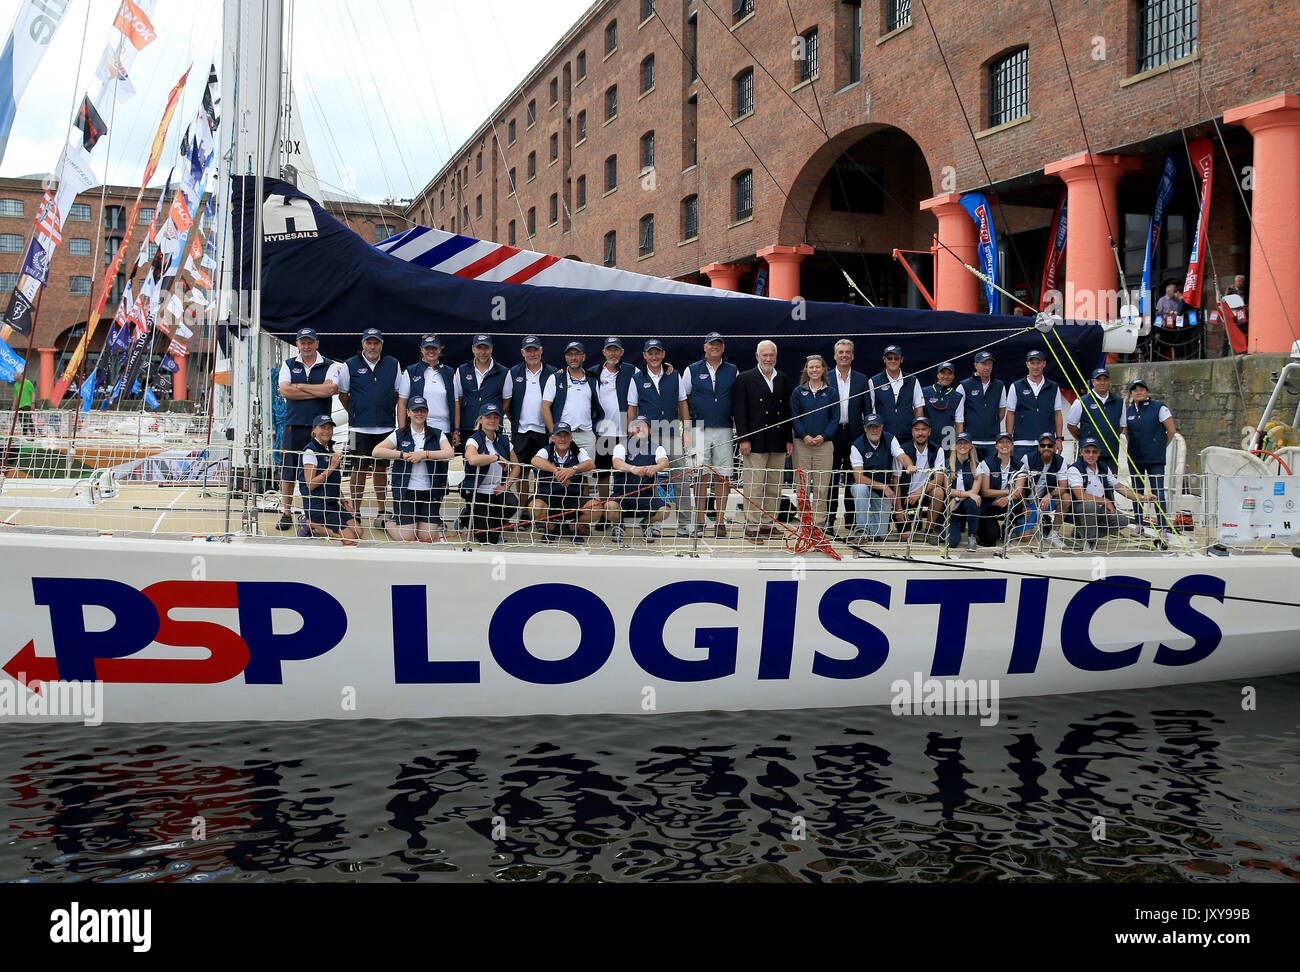 The crew psp logistics pose for hi-res stock photography and images - Alamy